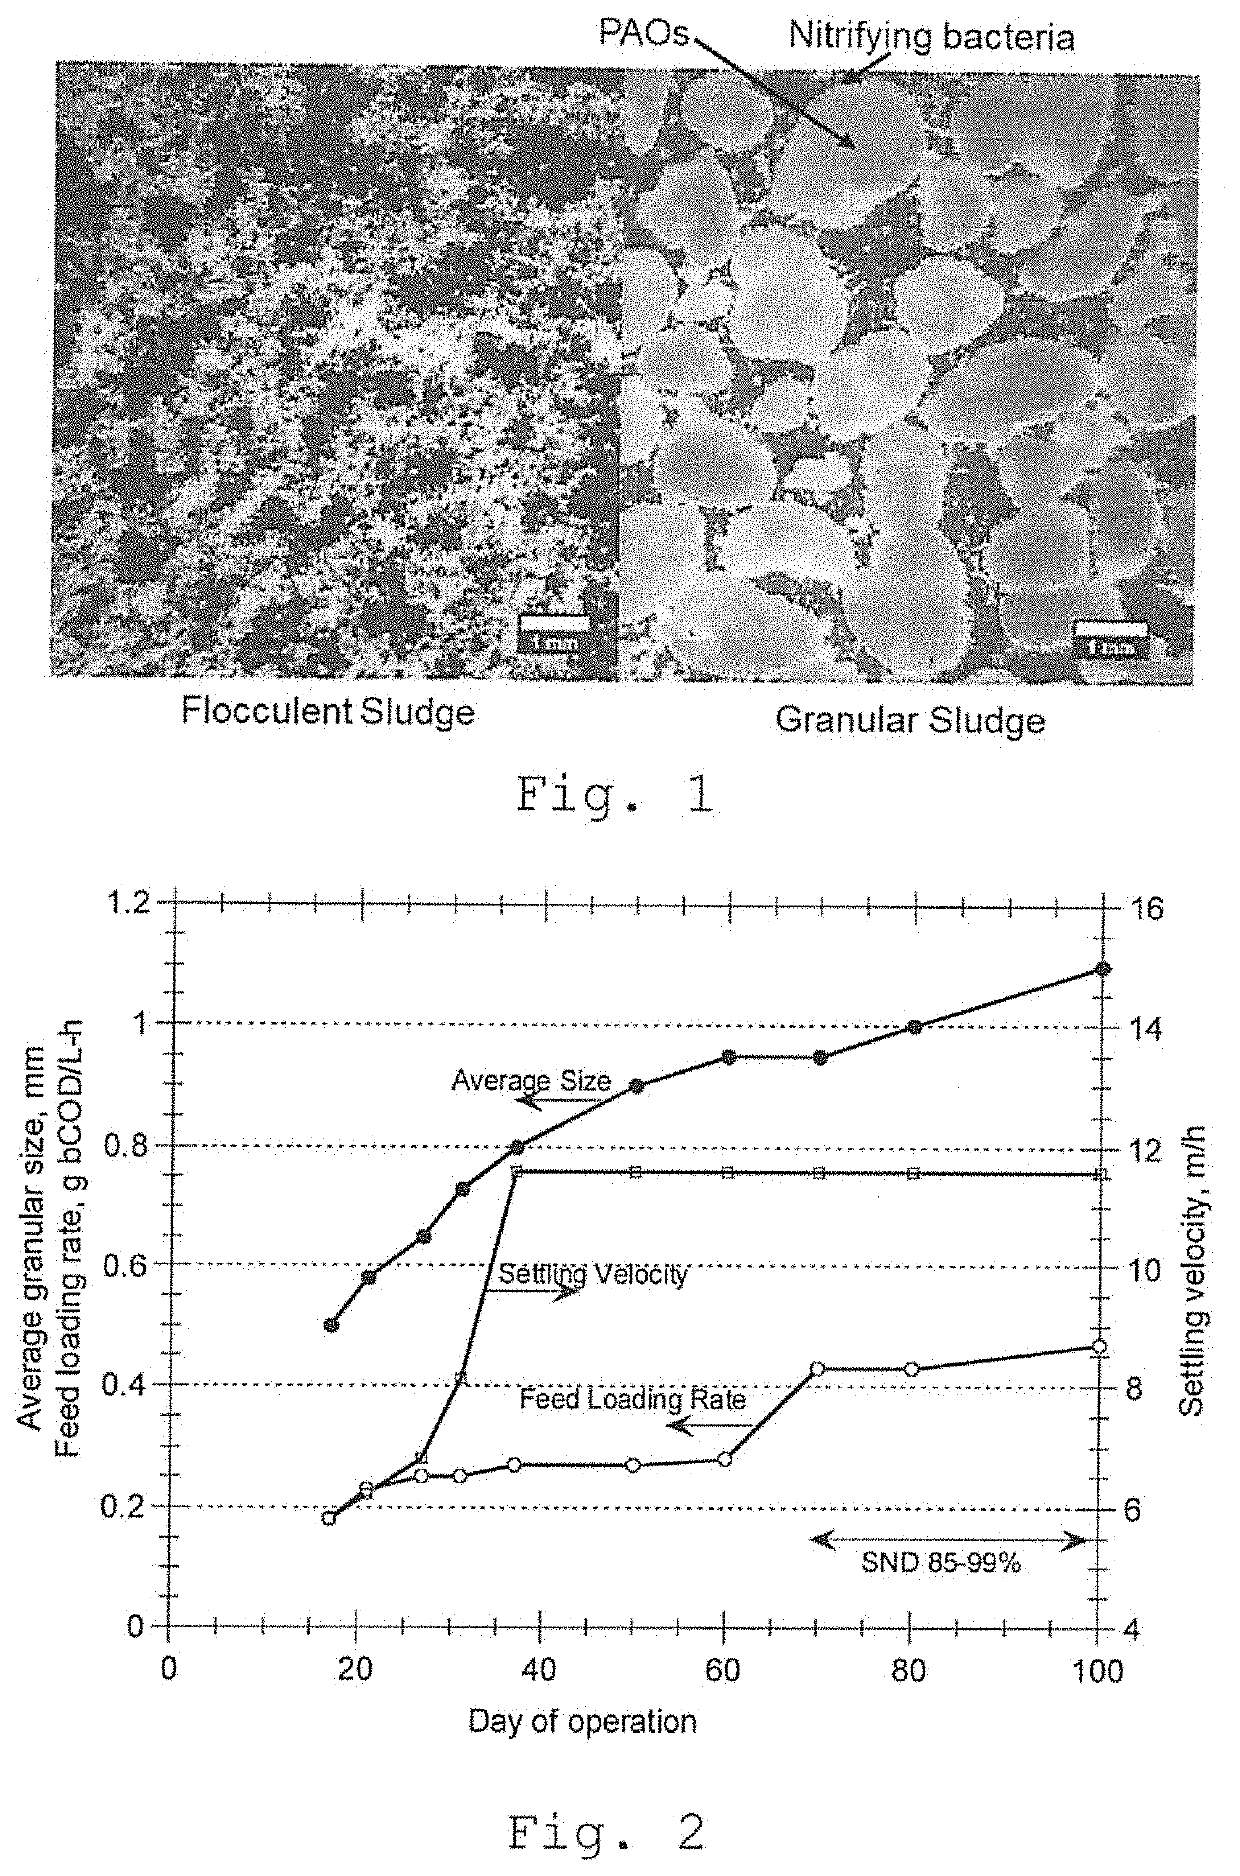 Biomass selection and control for continuous flow granular/flocculent activated sludge processes